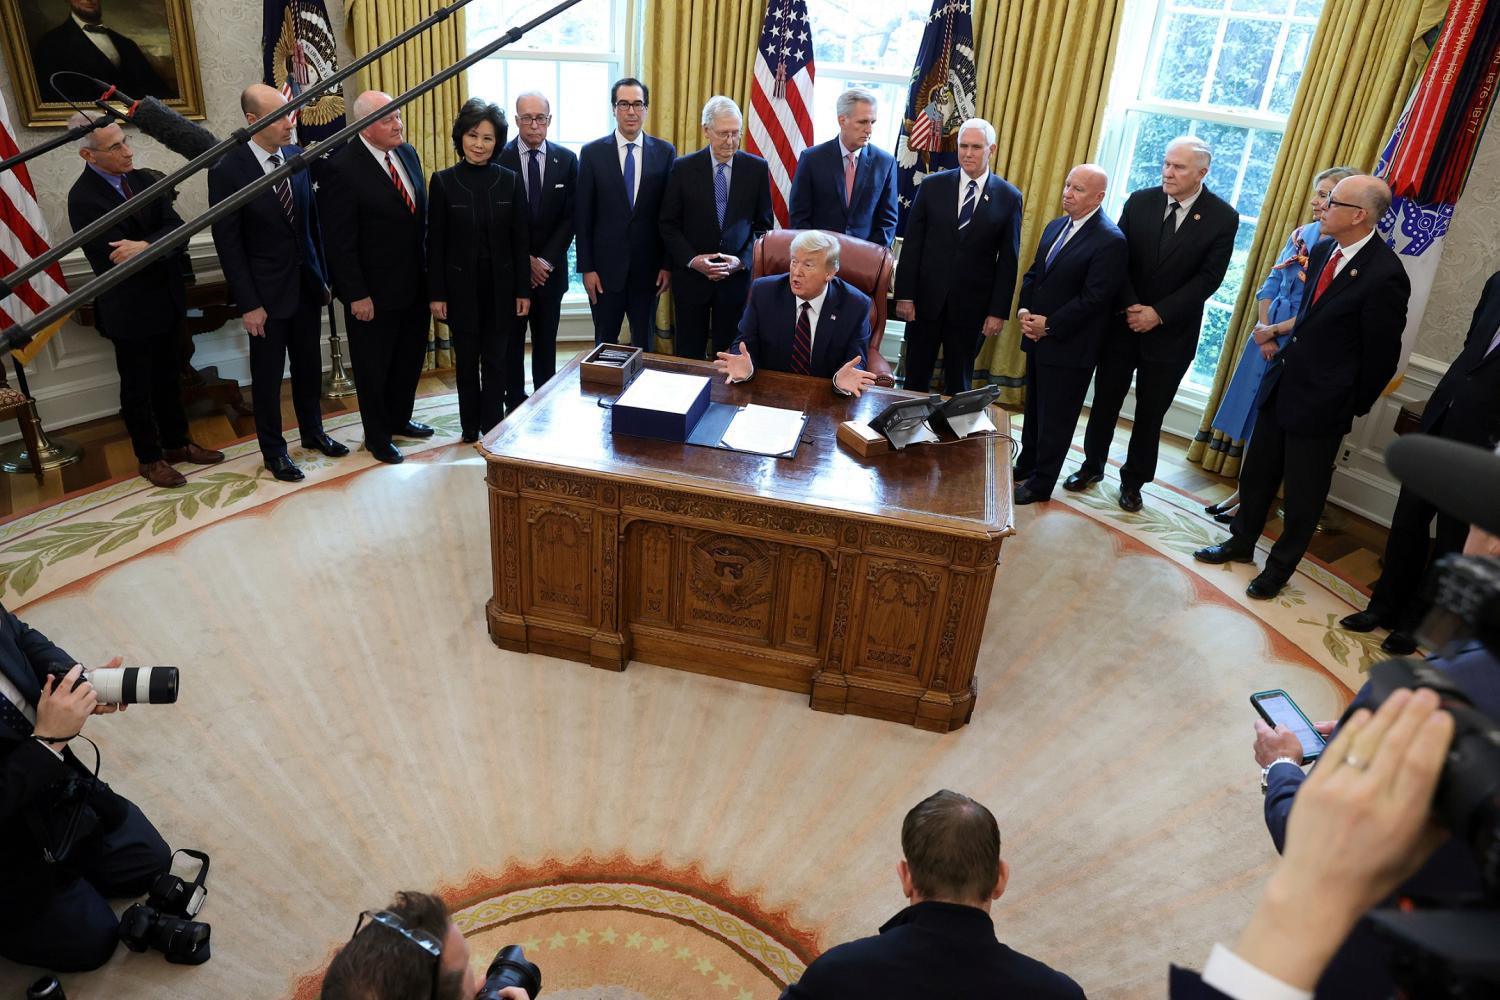 U.S. President Donald Trump signs the $2.2 trillion H.R. 748 CARES Act coronavirus aid package bill in the Oval Office of the White House in Washington, U.S., March 27, 2020. REUTERS/Jonathan Ernst     TPX IMAGES OF THE DAY